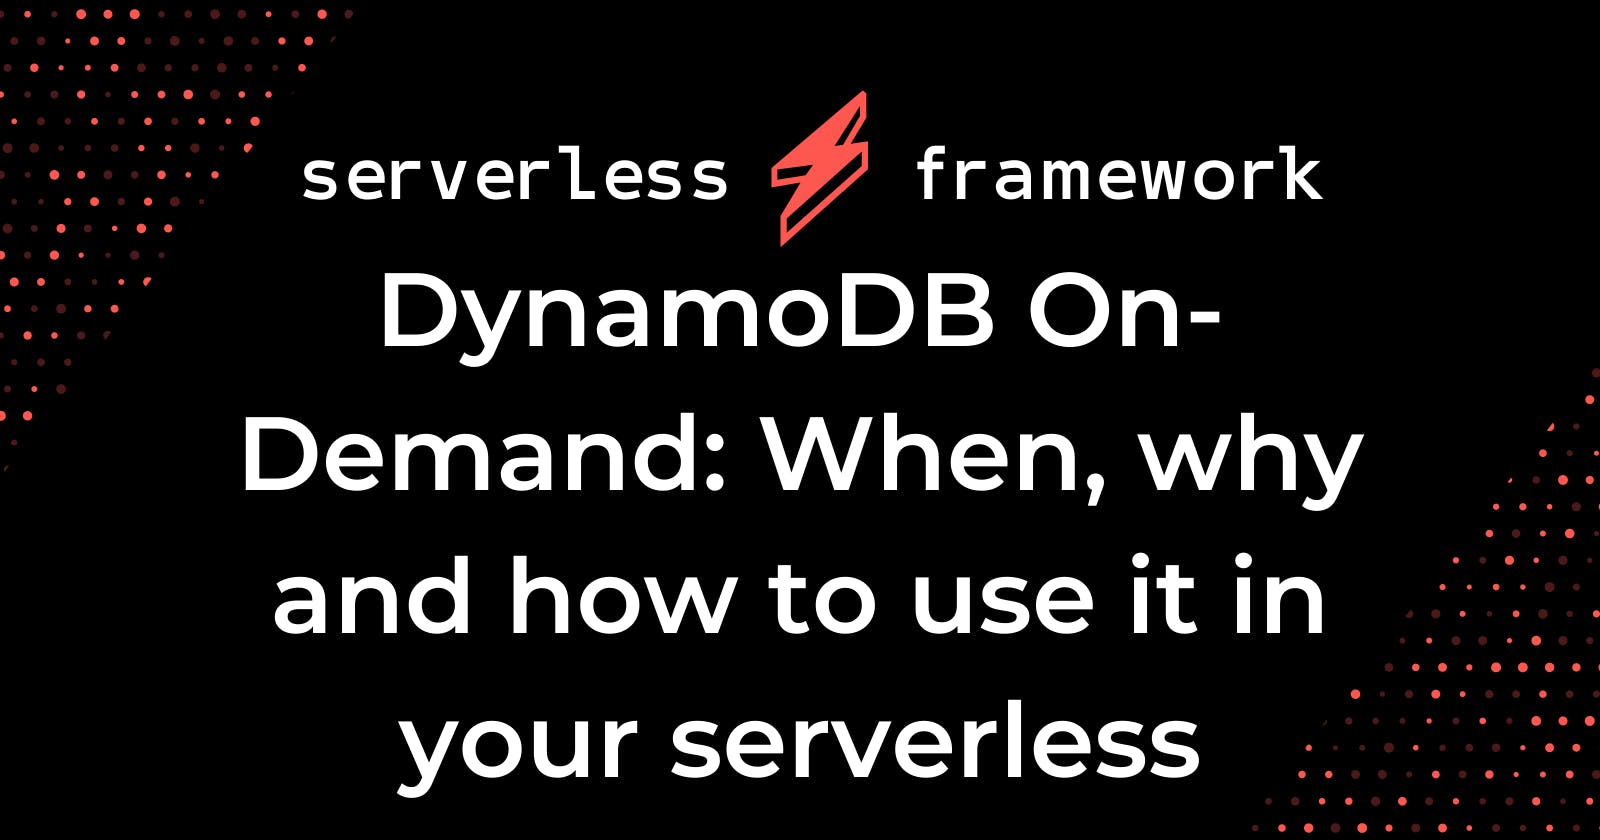 DynamoDB On-Demand: When, why and how to use it in your serverless applications